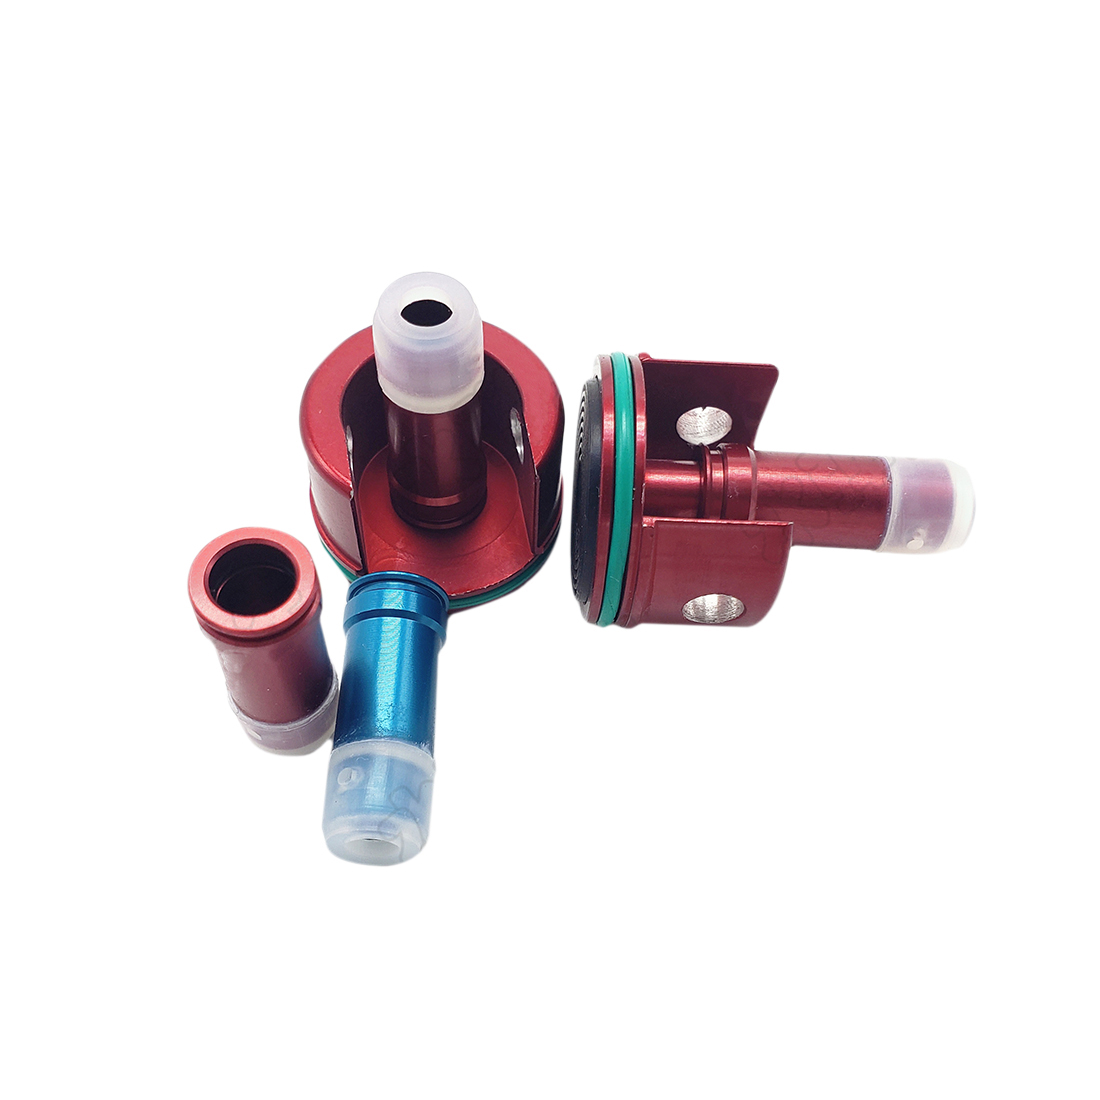 Dedicated Cylinder Head and Air Seal Nozzle for XWE M4 Water Gel Beads Blaster - Color Random